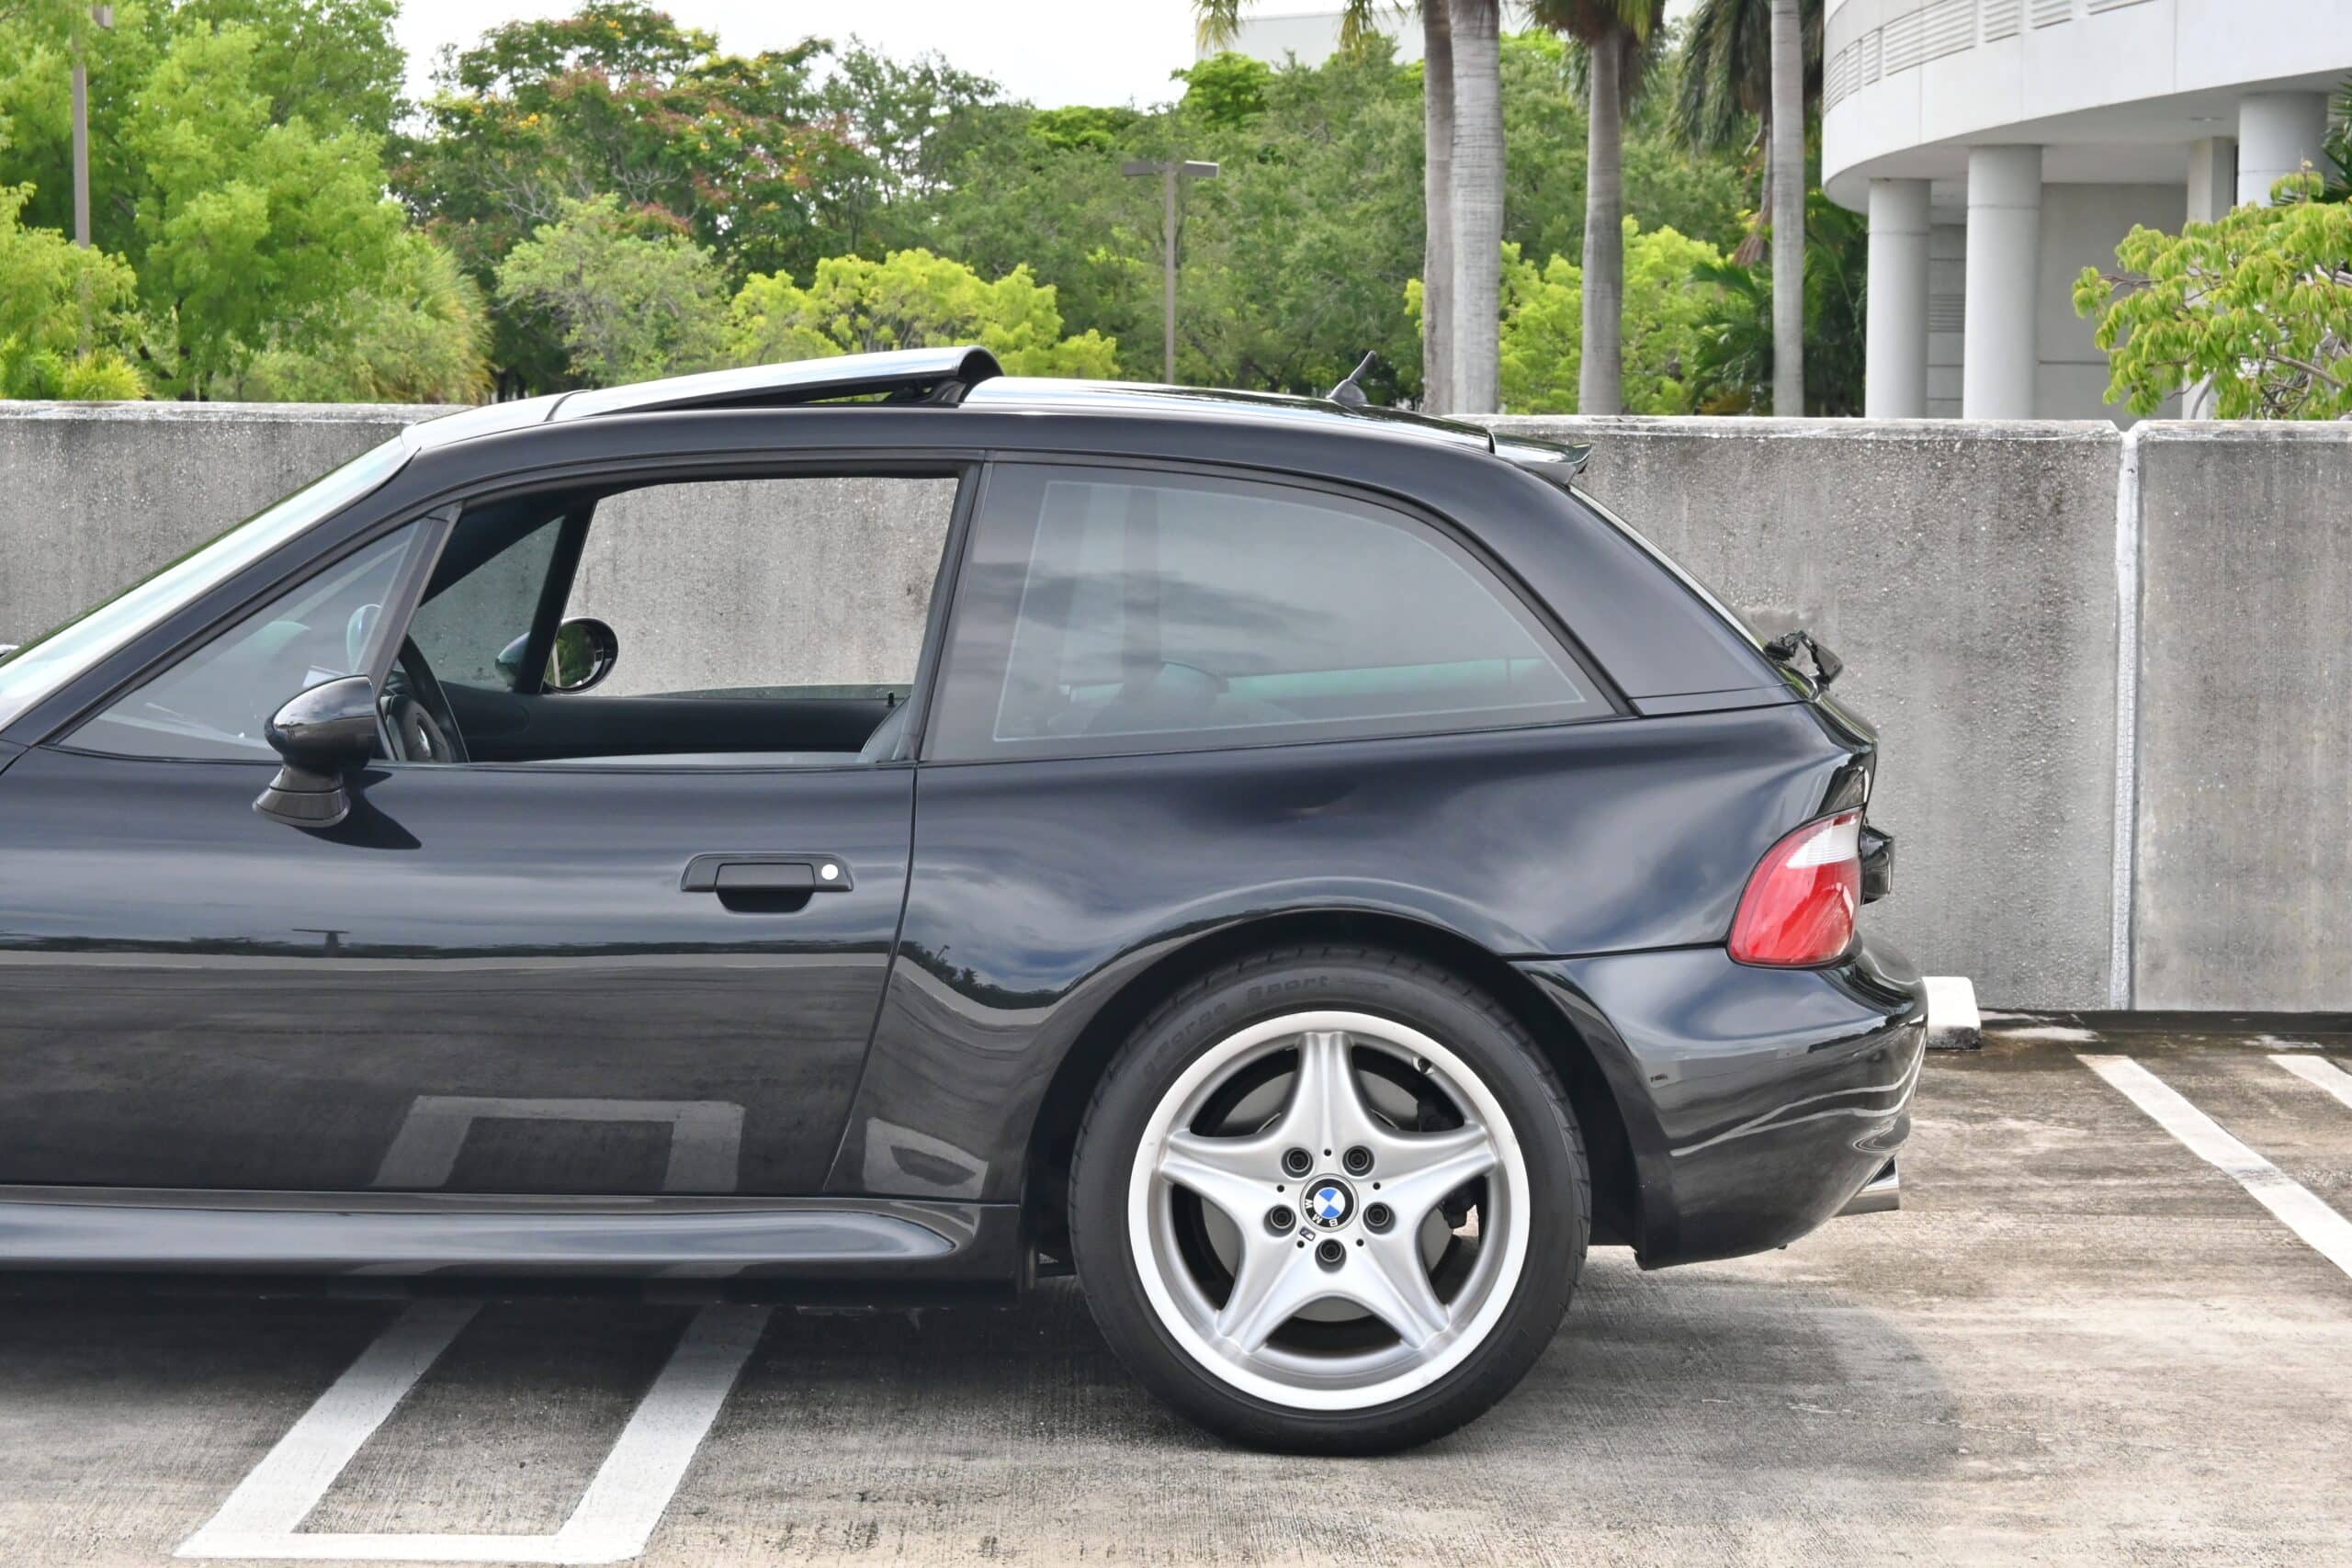 2000 BMW Z3 M Coupe 1 of 41 in this Color Combination – Unmodified – Well Maintained – Florida Car